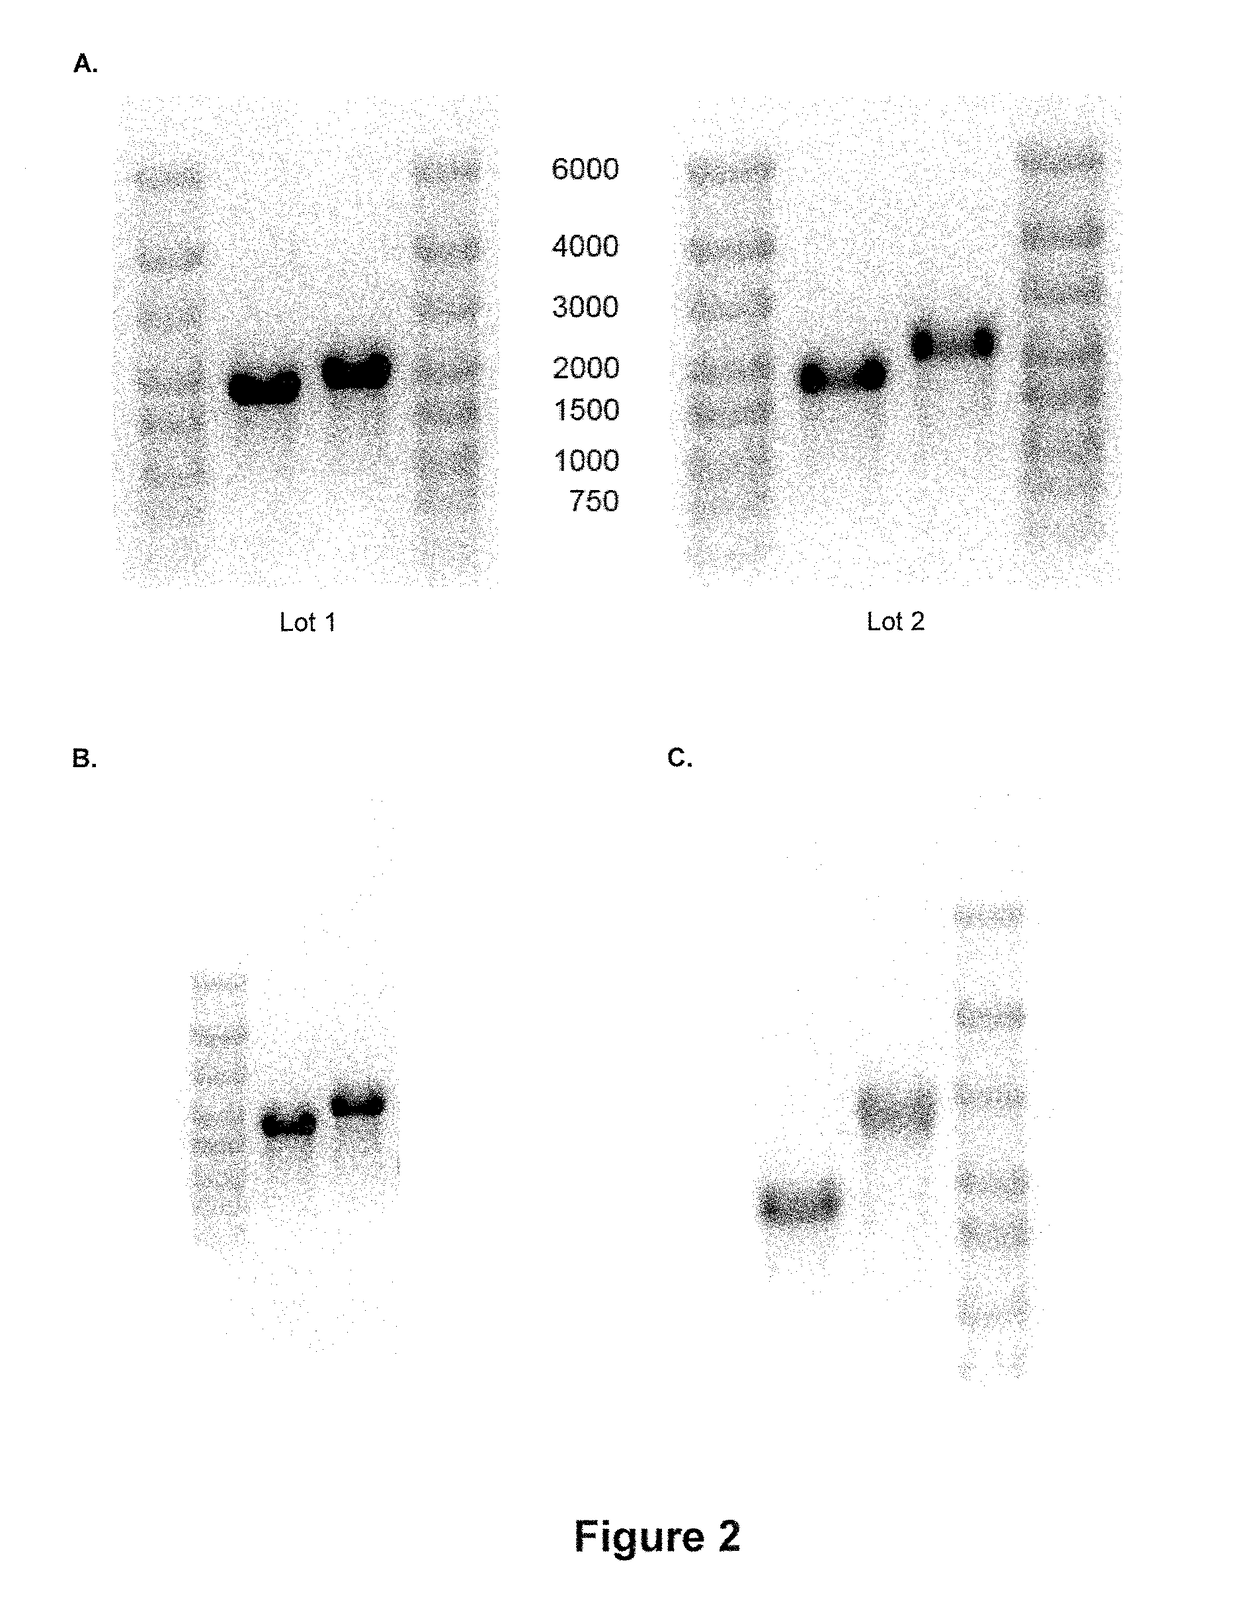 Artificial nucleic acid molecules for improved protein expression